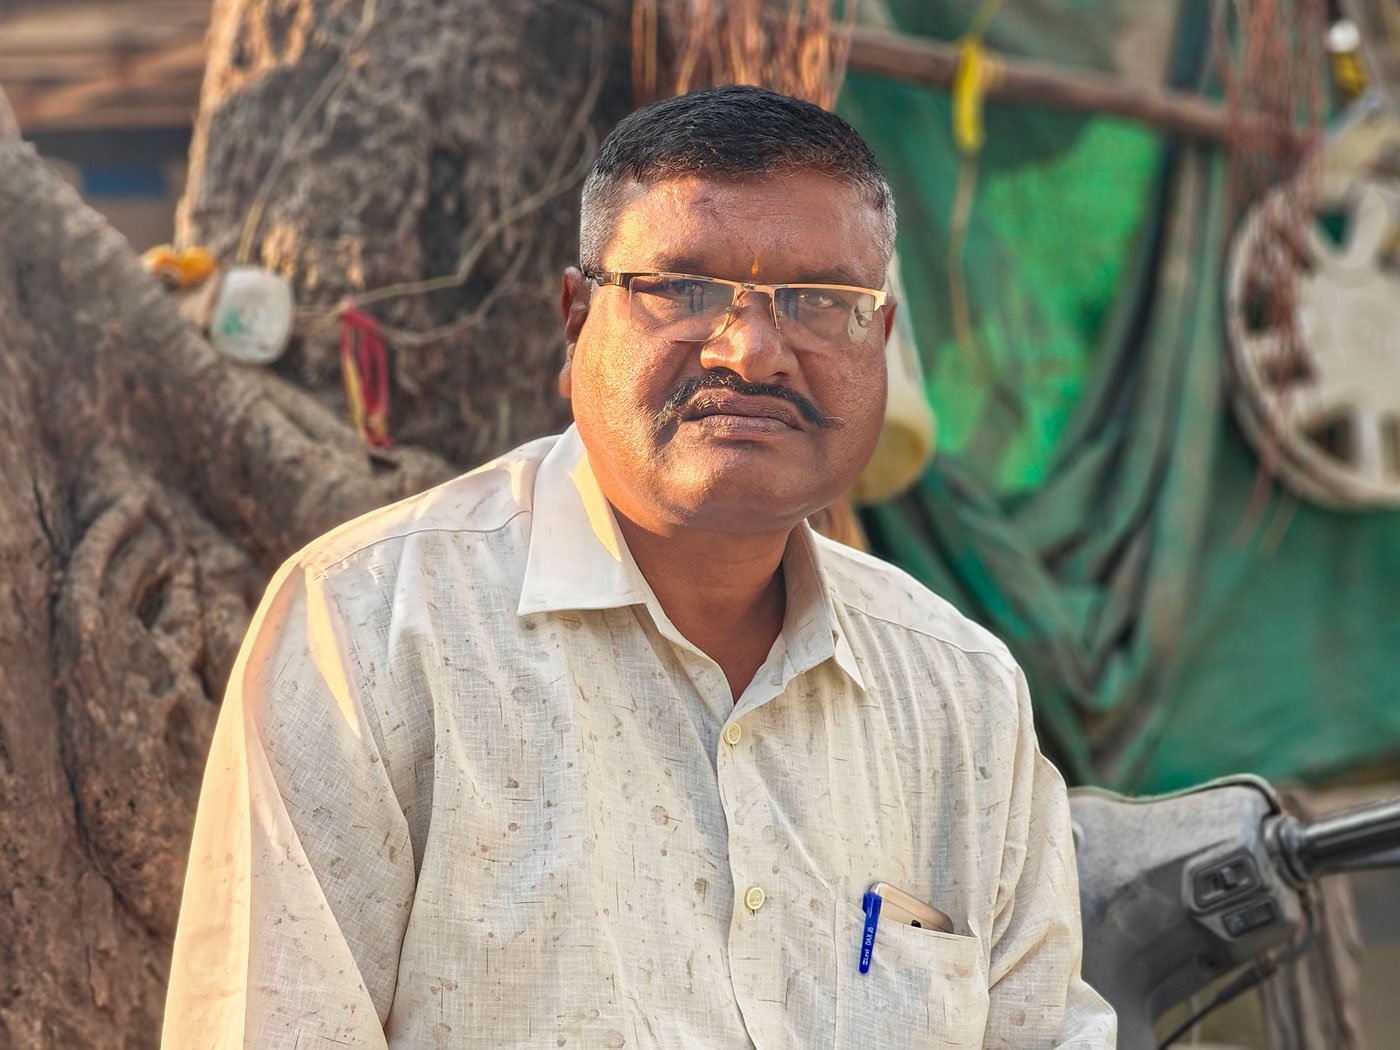 Babasaheb Londhe switched from farming to running a successful business transporting cattle. But after the Bharatiya Janta Party came to power in 2014, cow vigilantism began to rise in Maharashtra and Londhe's business suffered serious losses. He now fears for his own safety and the safety of his drivers